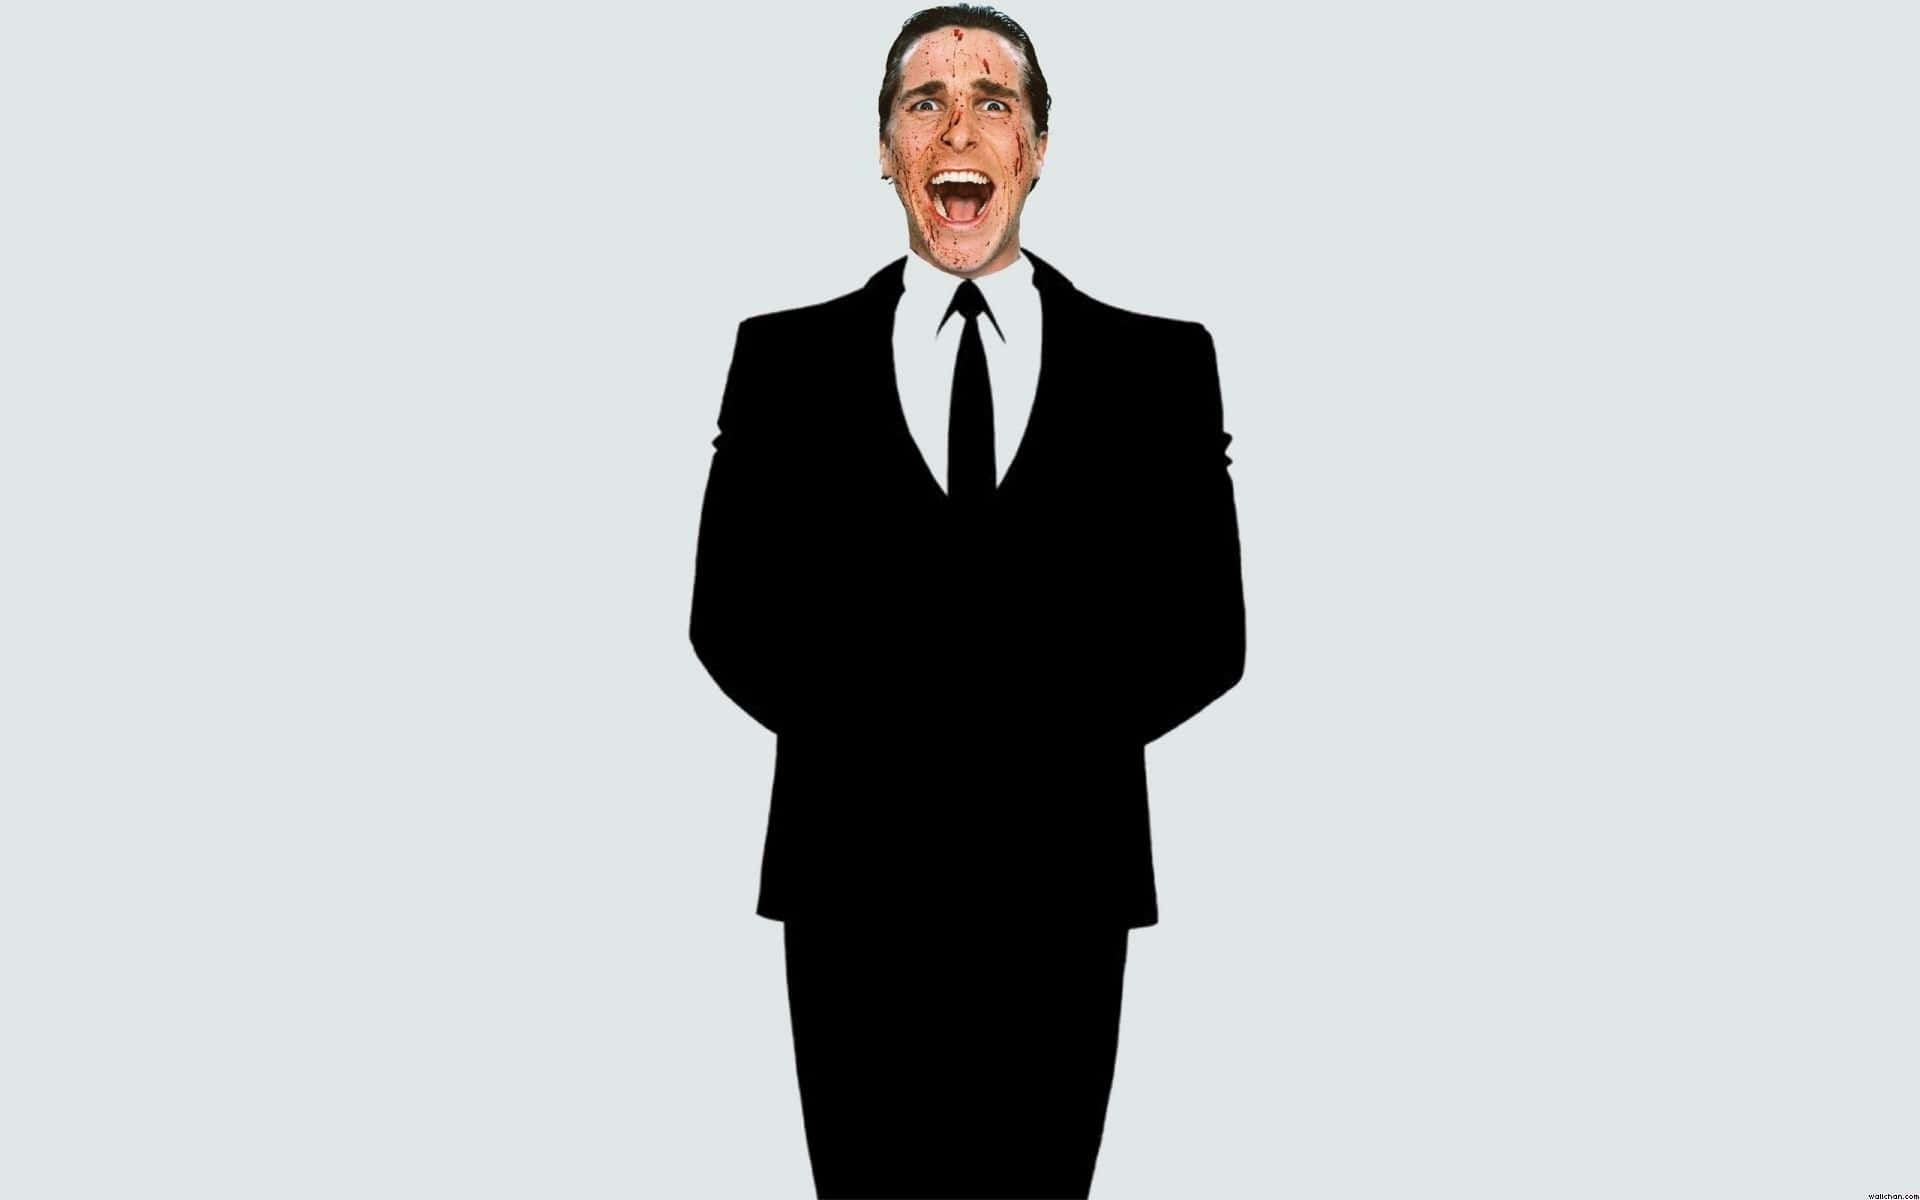 Laughing Manin Black Suit Background